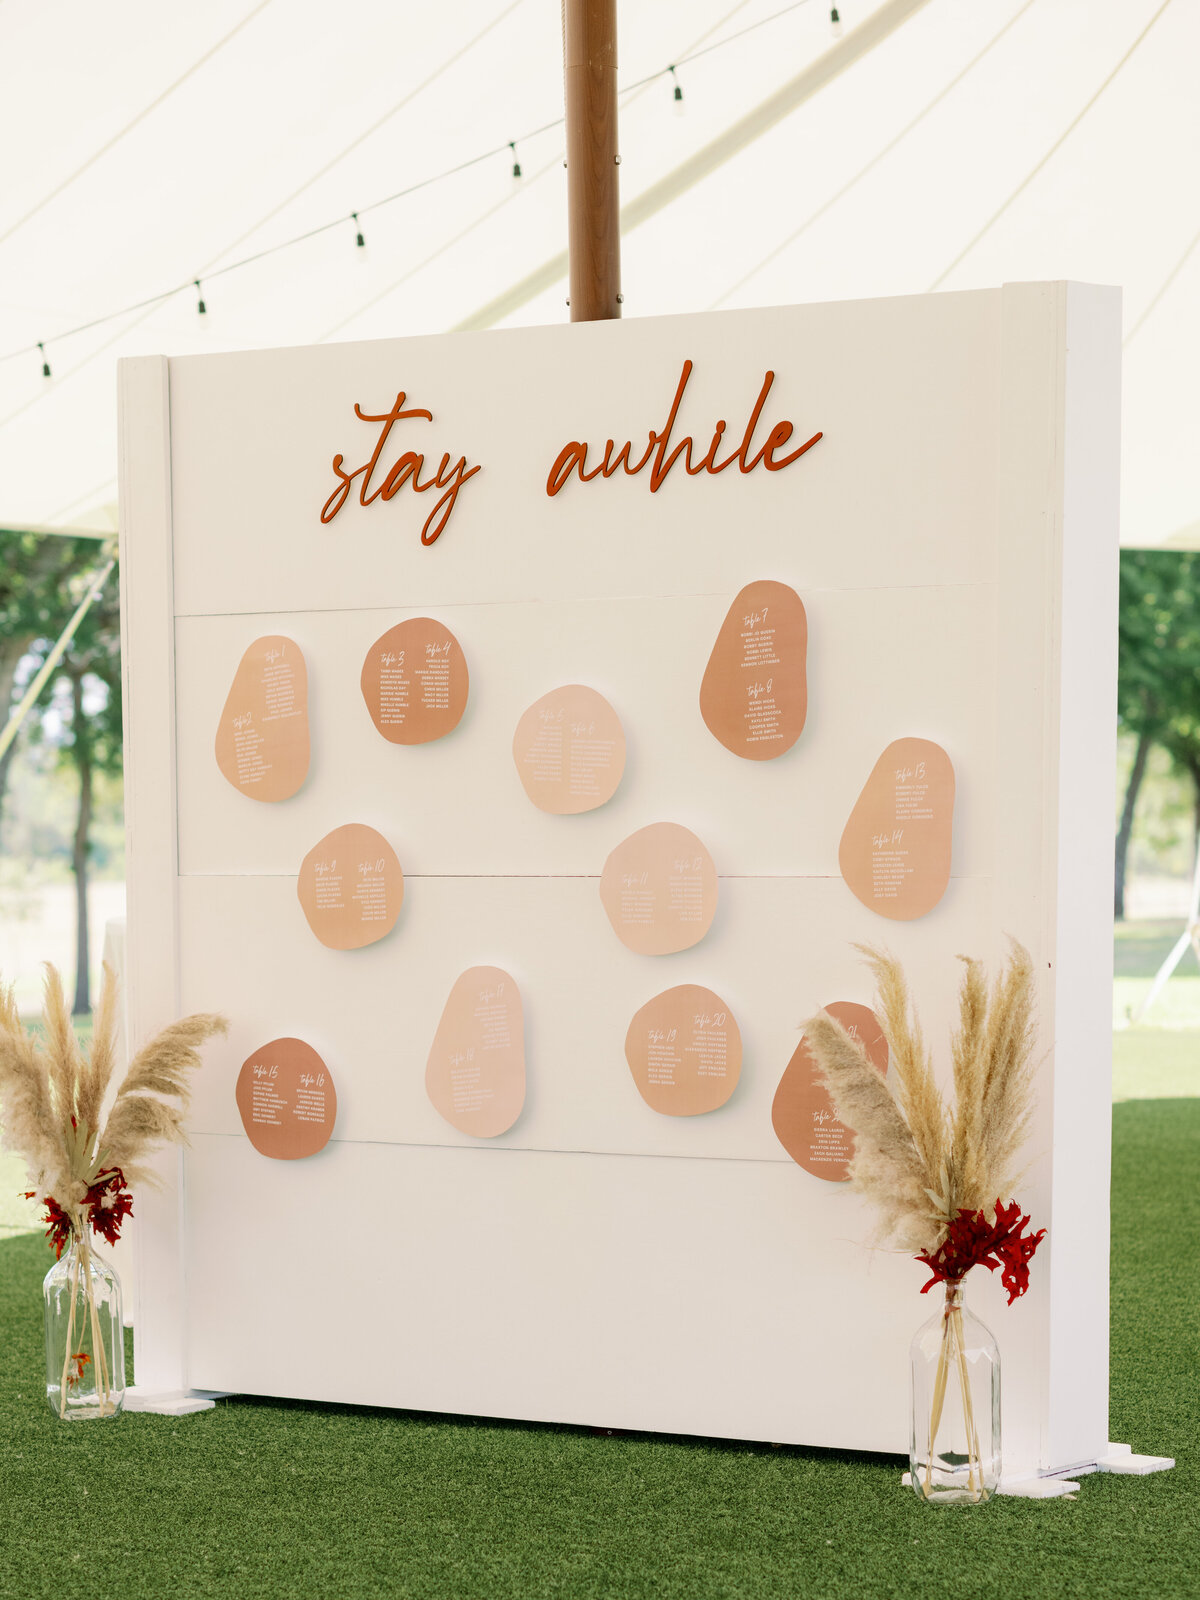 White and neutral colored wedding seating chart backdrop with abstract shapes